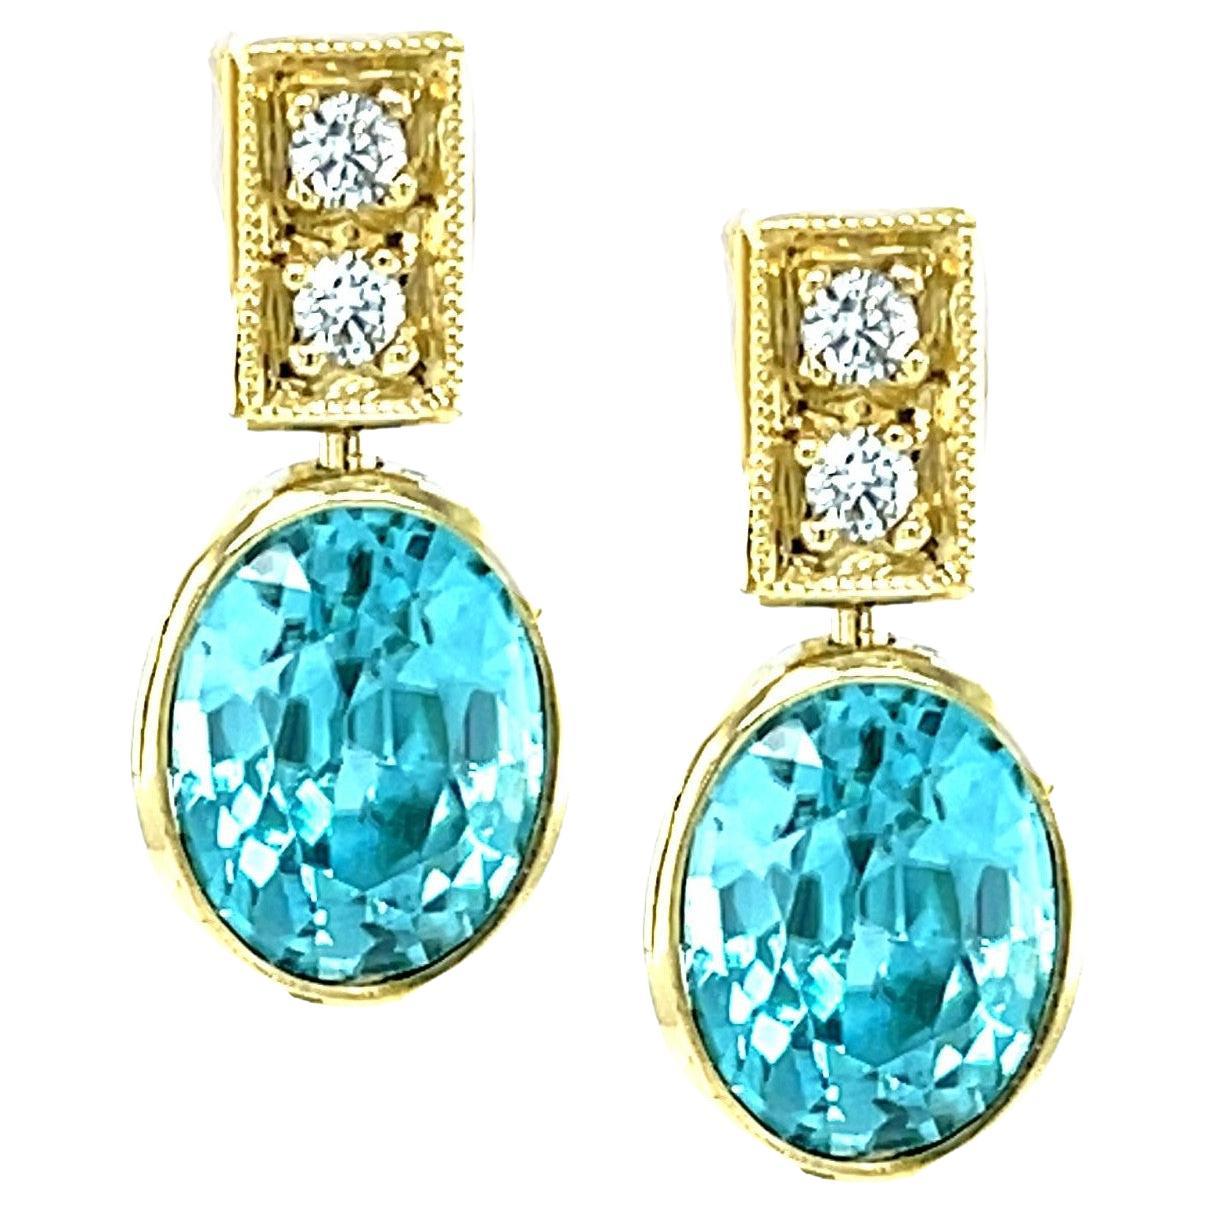 Blue Zircon and Diamond Drop Earrings in Yellow Gold, 9.38 Carats Total For Sale